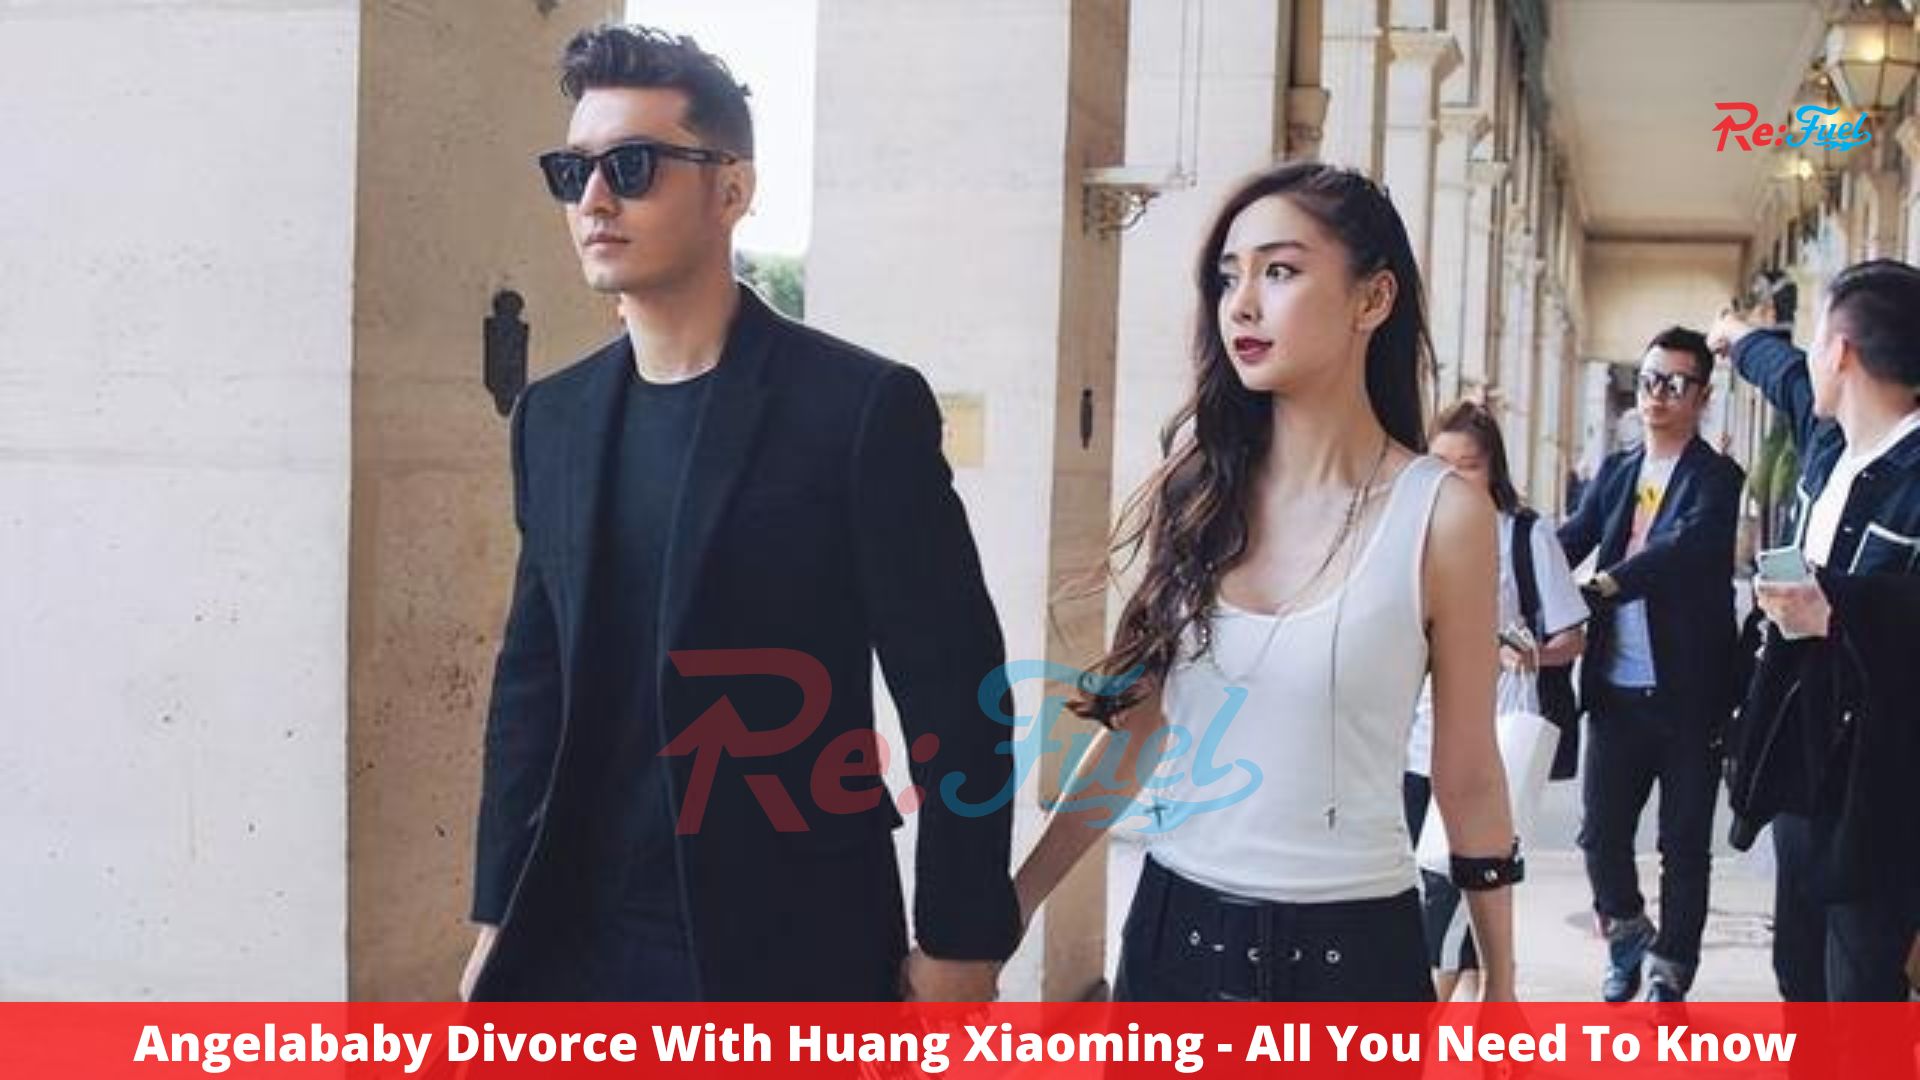 Angelababy Divorce With Huang Xiaoming - All You Need To Know